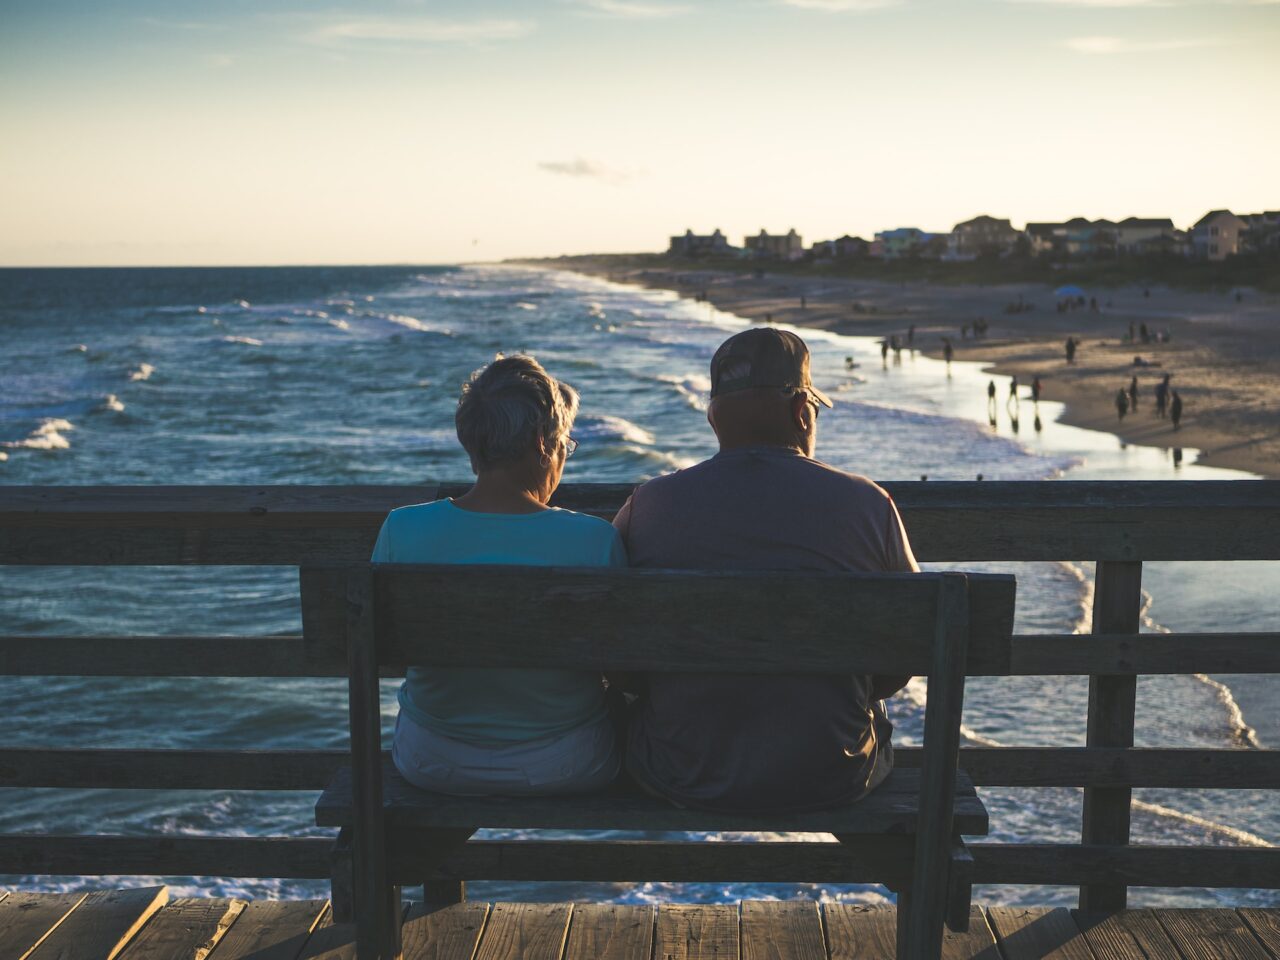 Two elderly retirees on a bench looking out at the beach